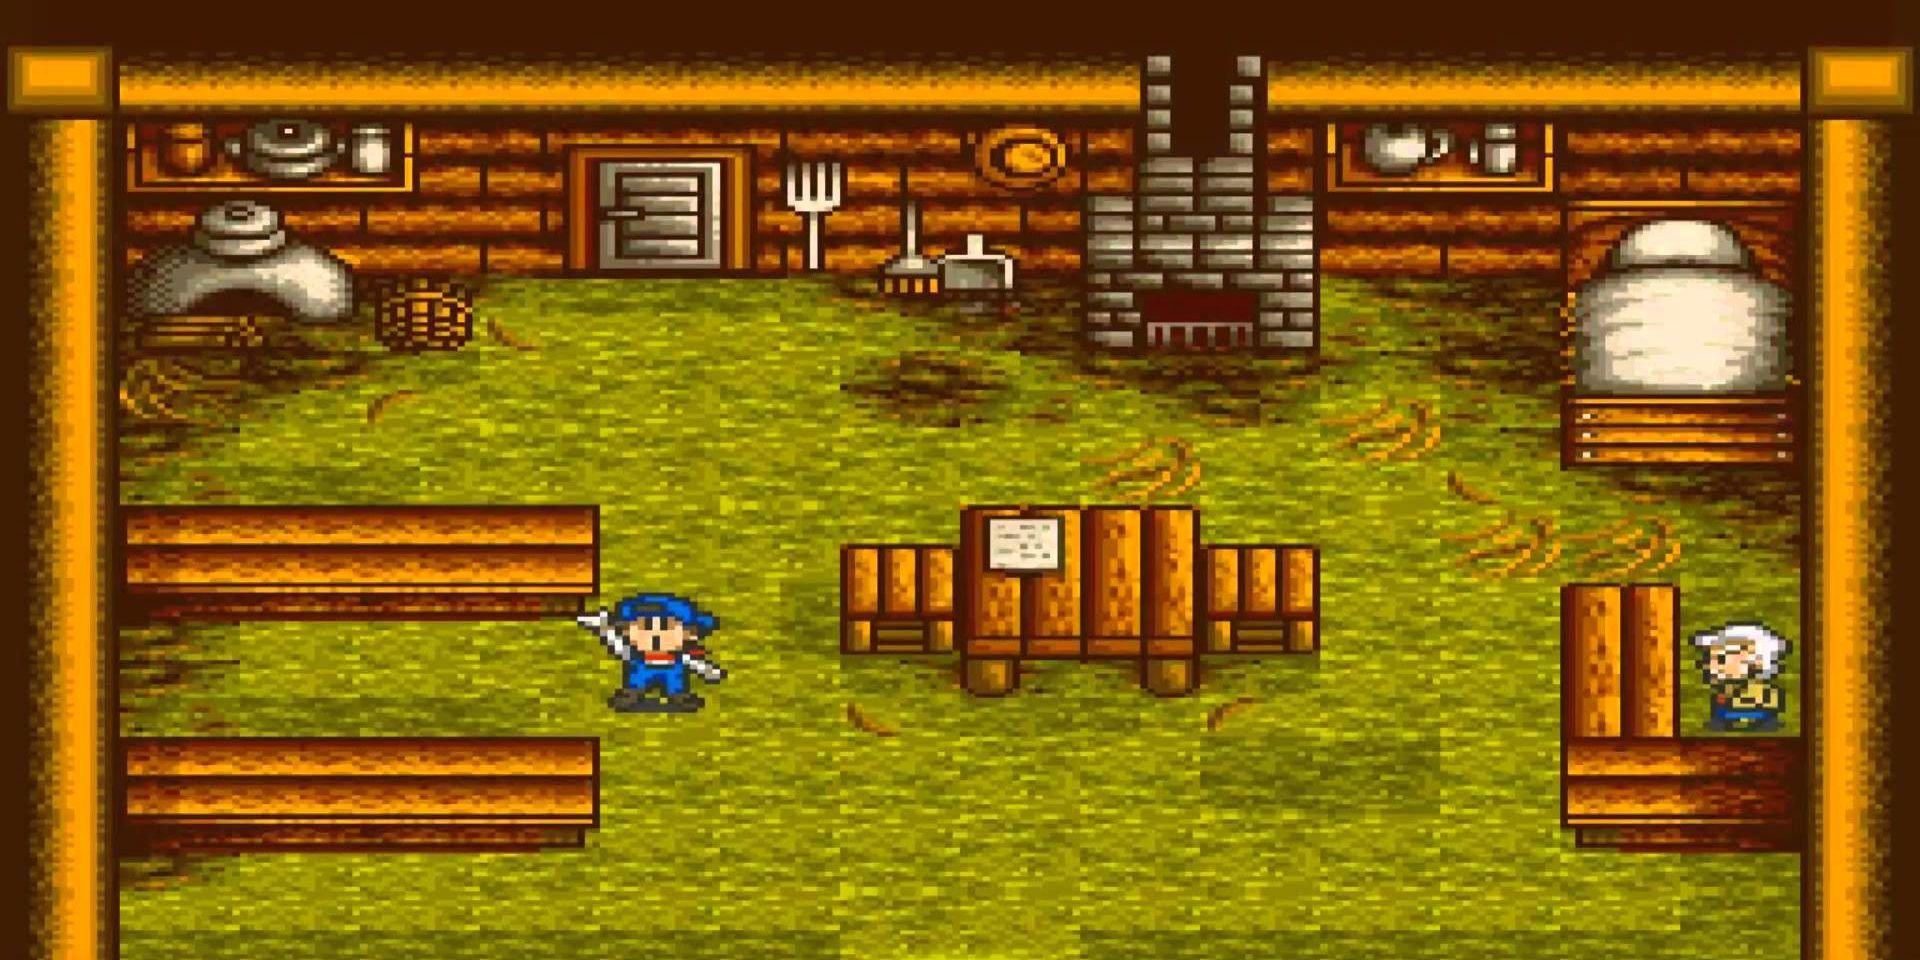 A screenshot from the original Harvest Moon video game on the SNES, with the player character inside their home.